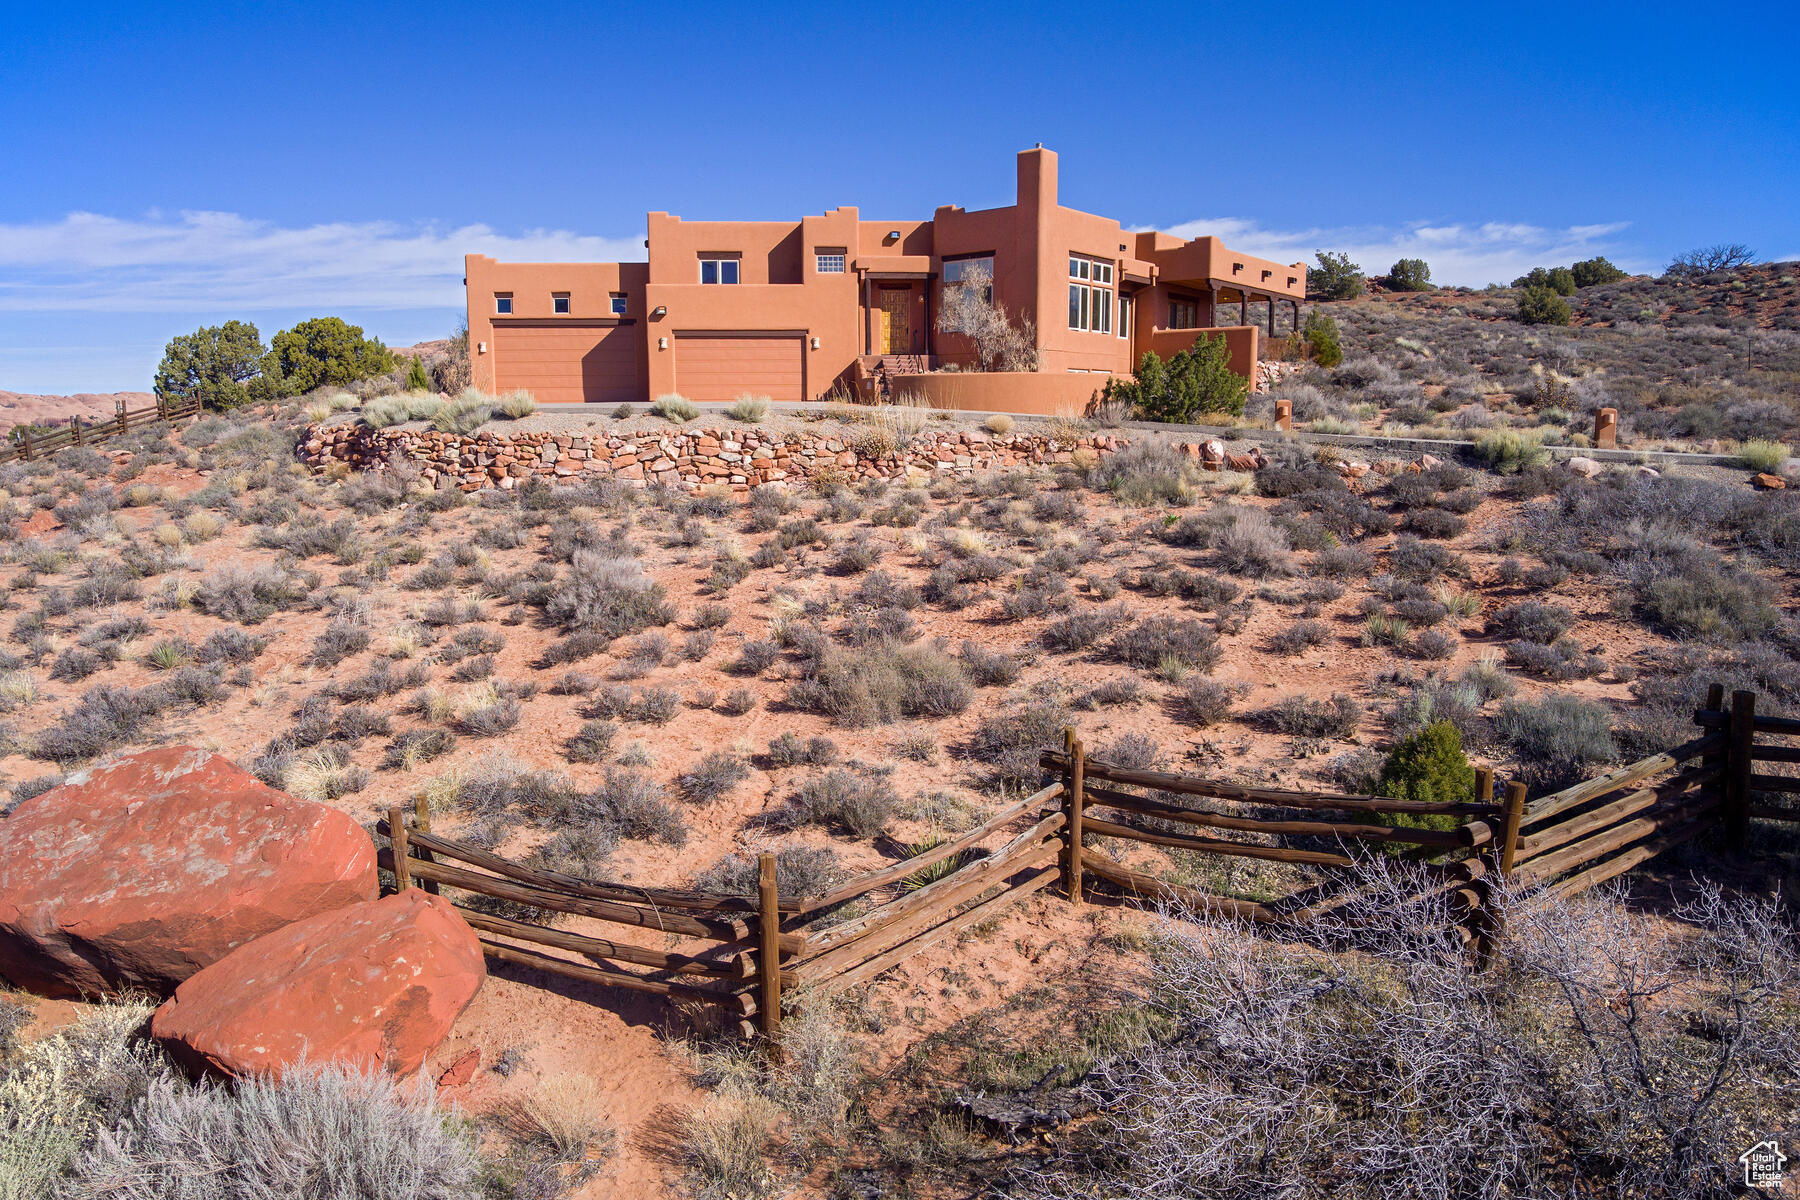 3137 E GEORGE WHITE, Moab, Utah 84532, 3 Bedrooms Bedrooms, 14 Rooms Rooms,3 BathroomsBathrooms,Residential,For sale,GEORGE WHITE,1985608